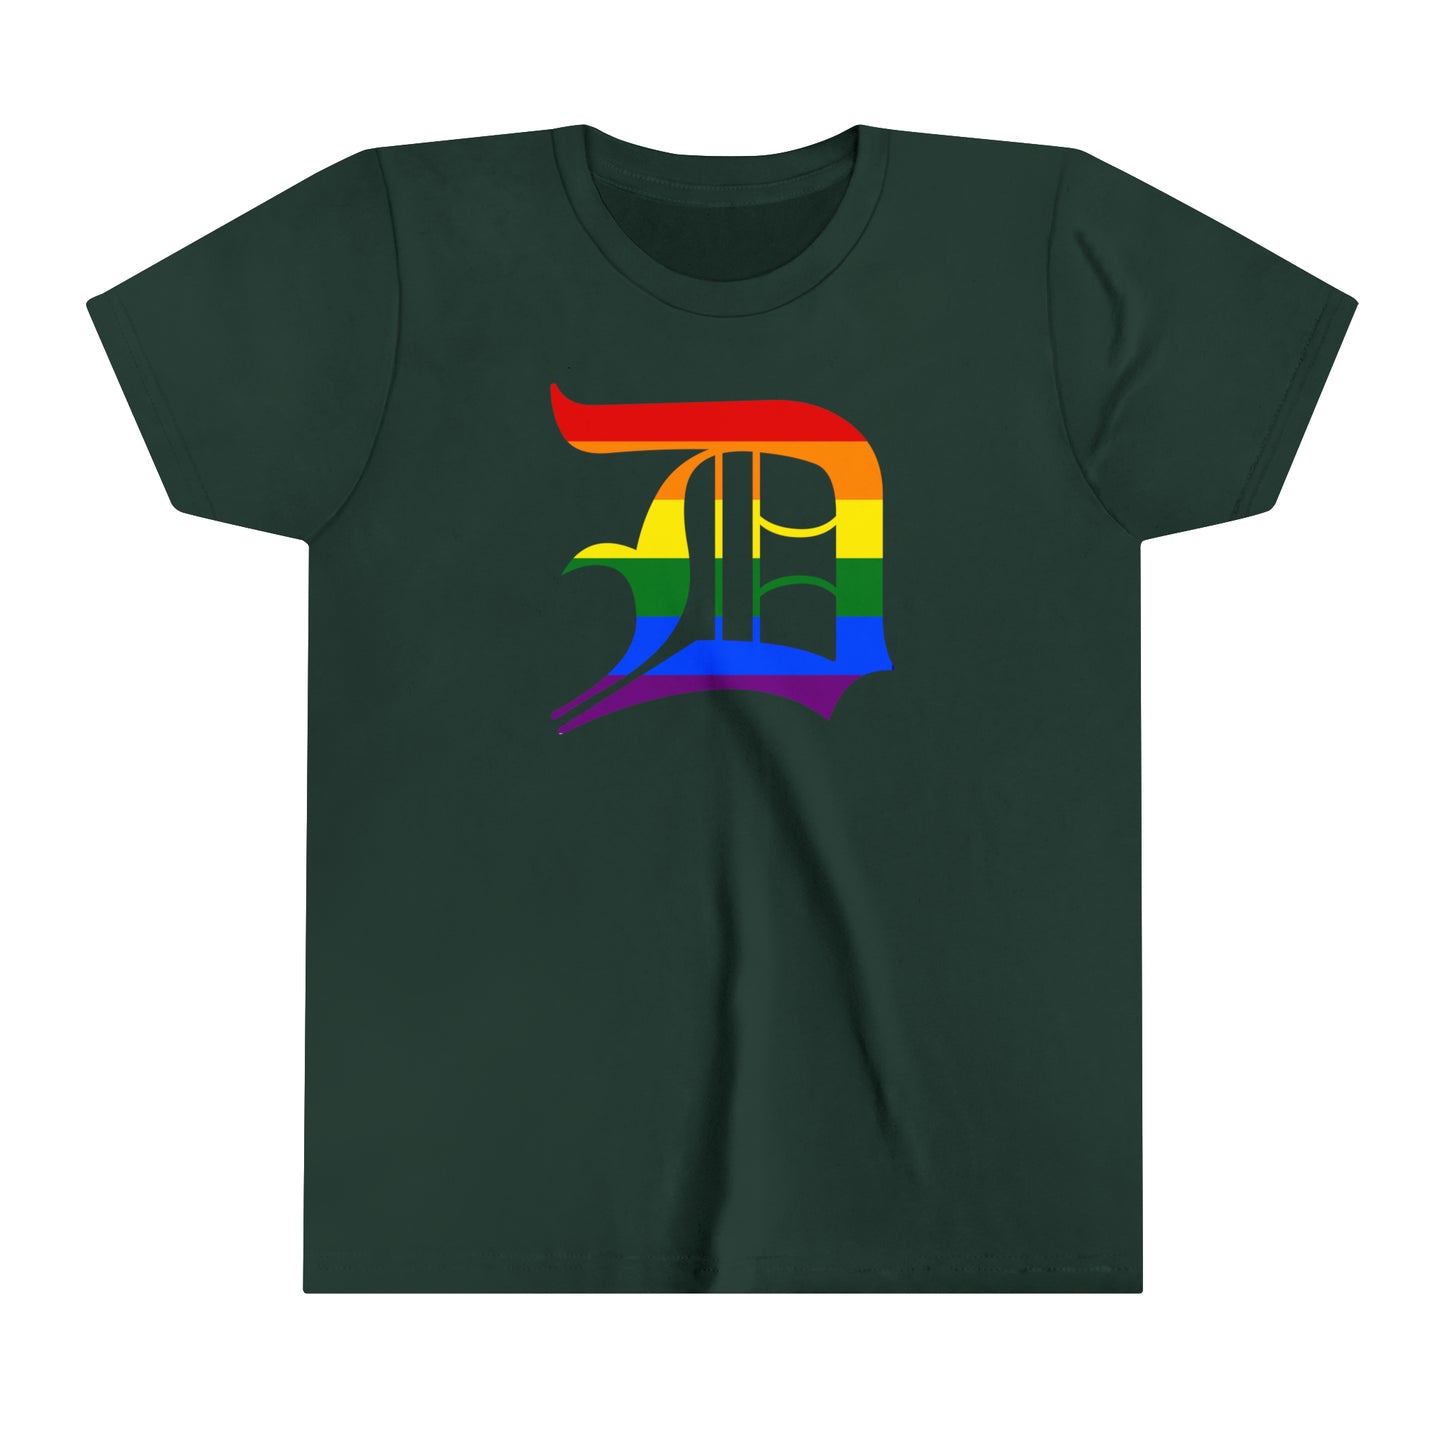 Detroit 'Old English D' T-Shirt (Rainbow Pride Edition) | Youth Short Sleeve